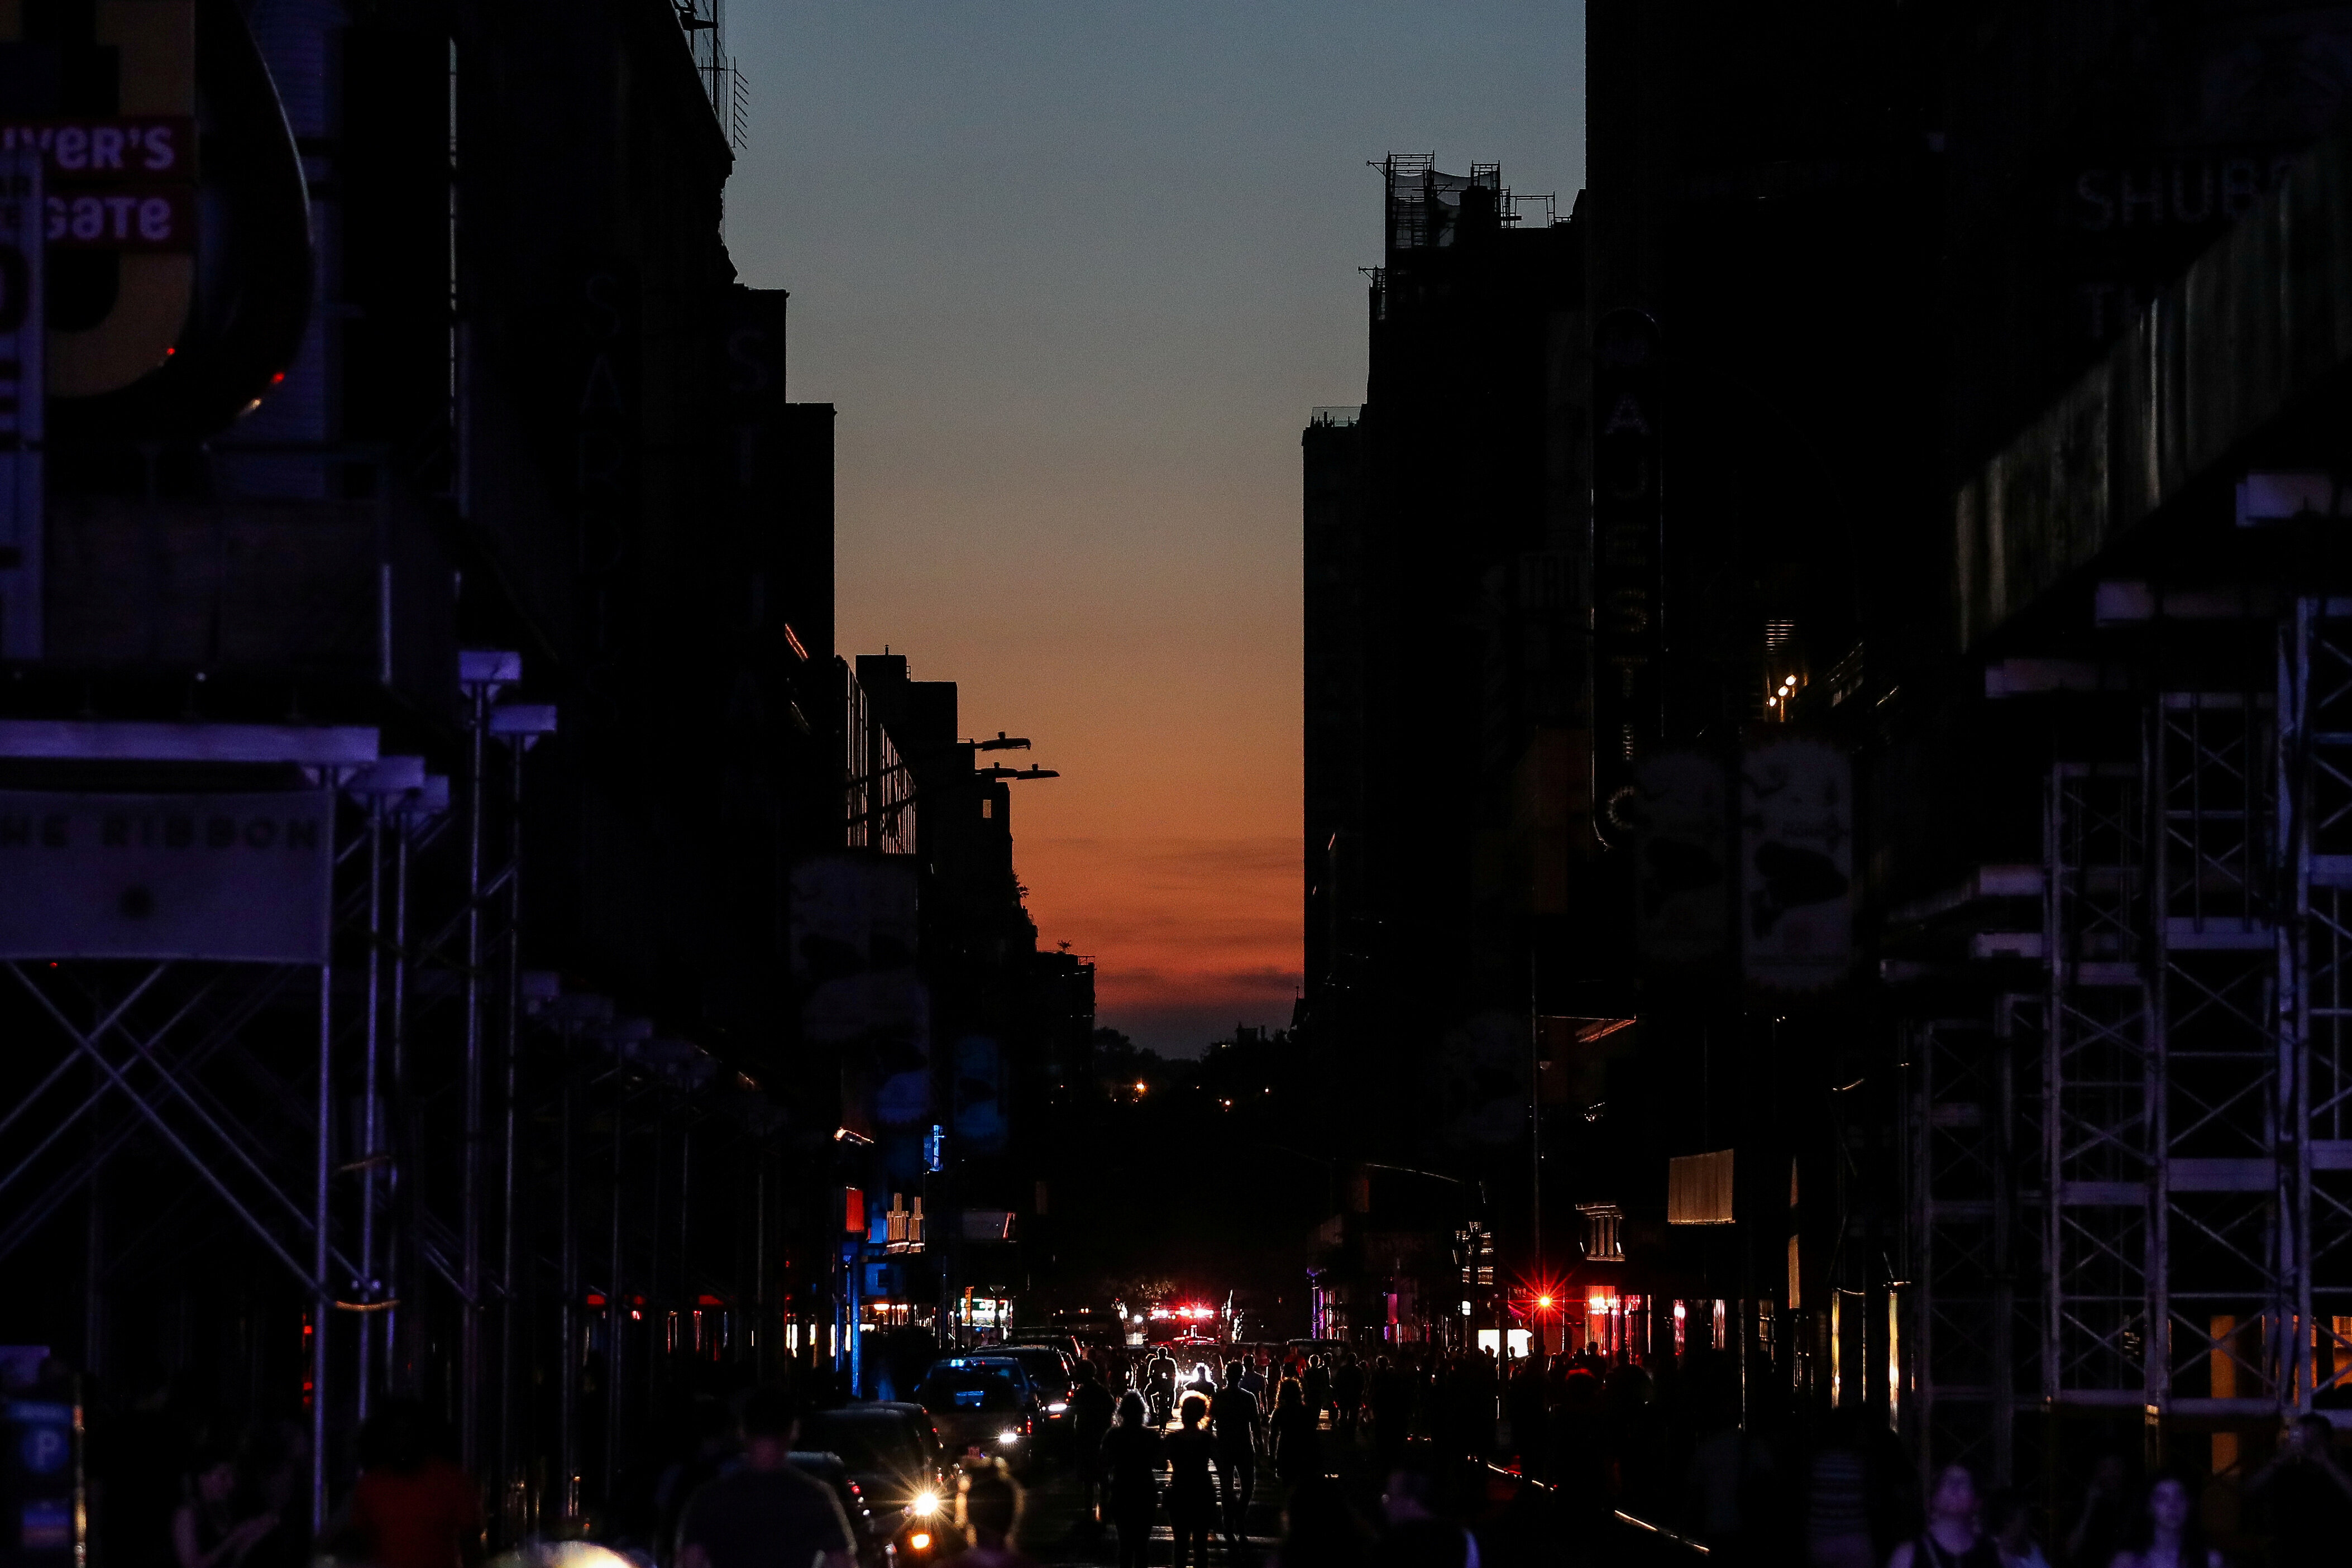 New York City Could Be Headed For Another Blackout As Heat Wave Looms